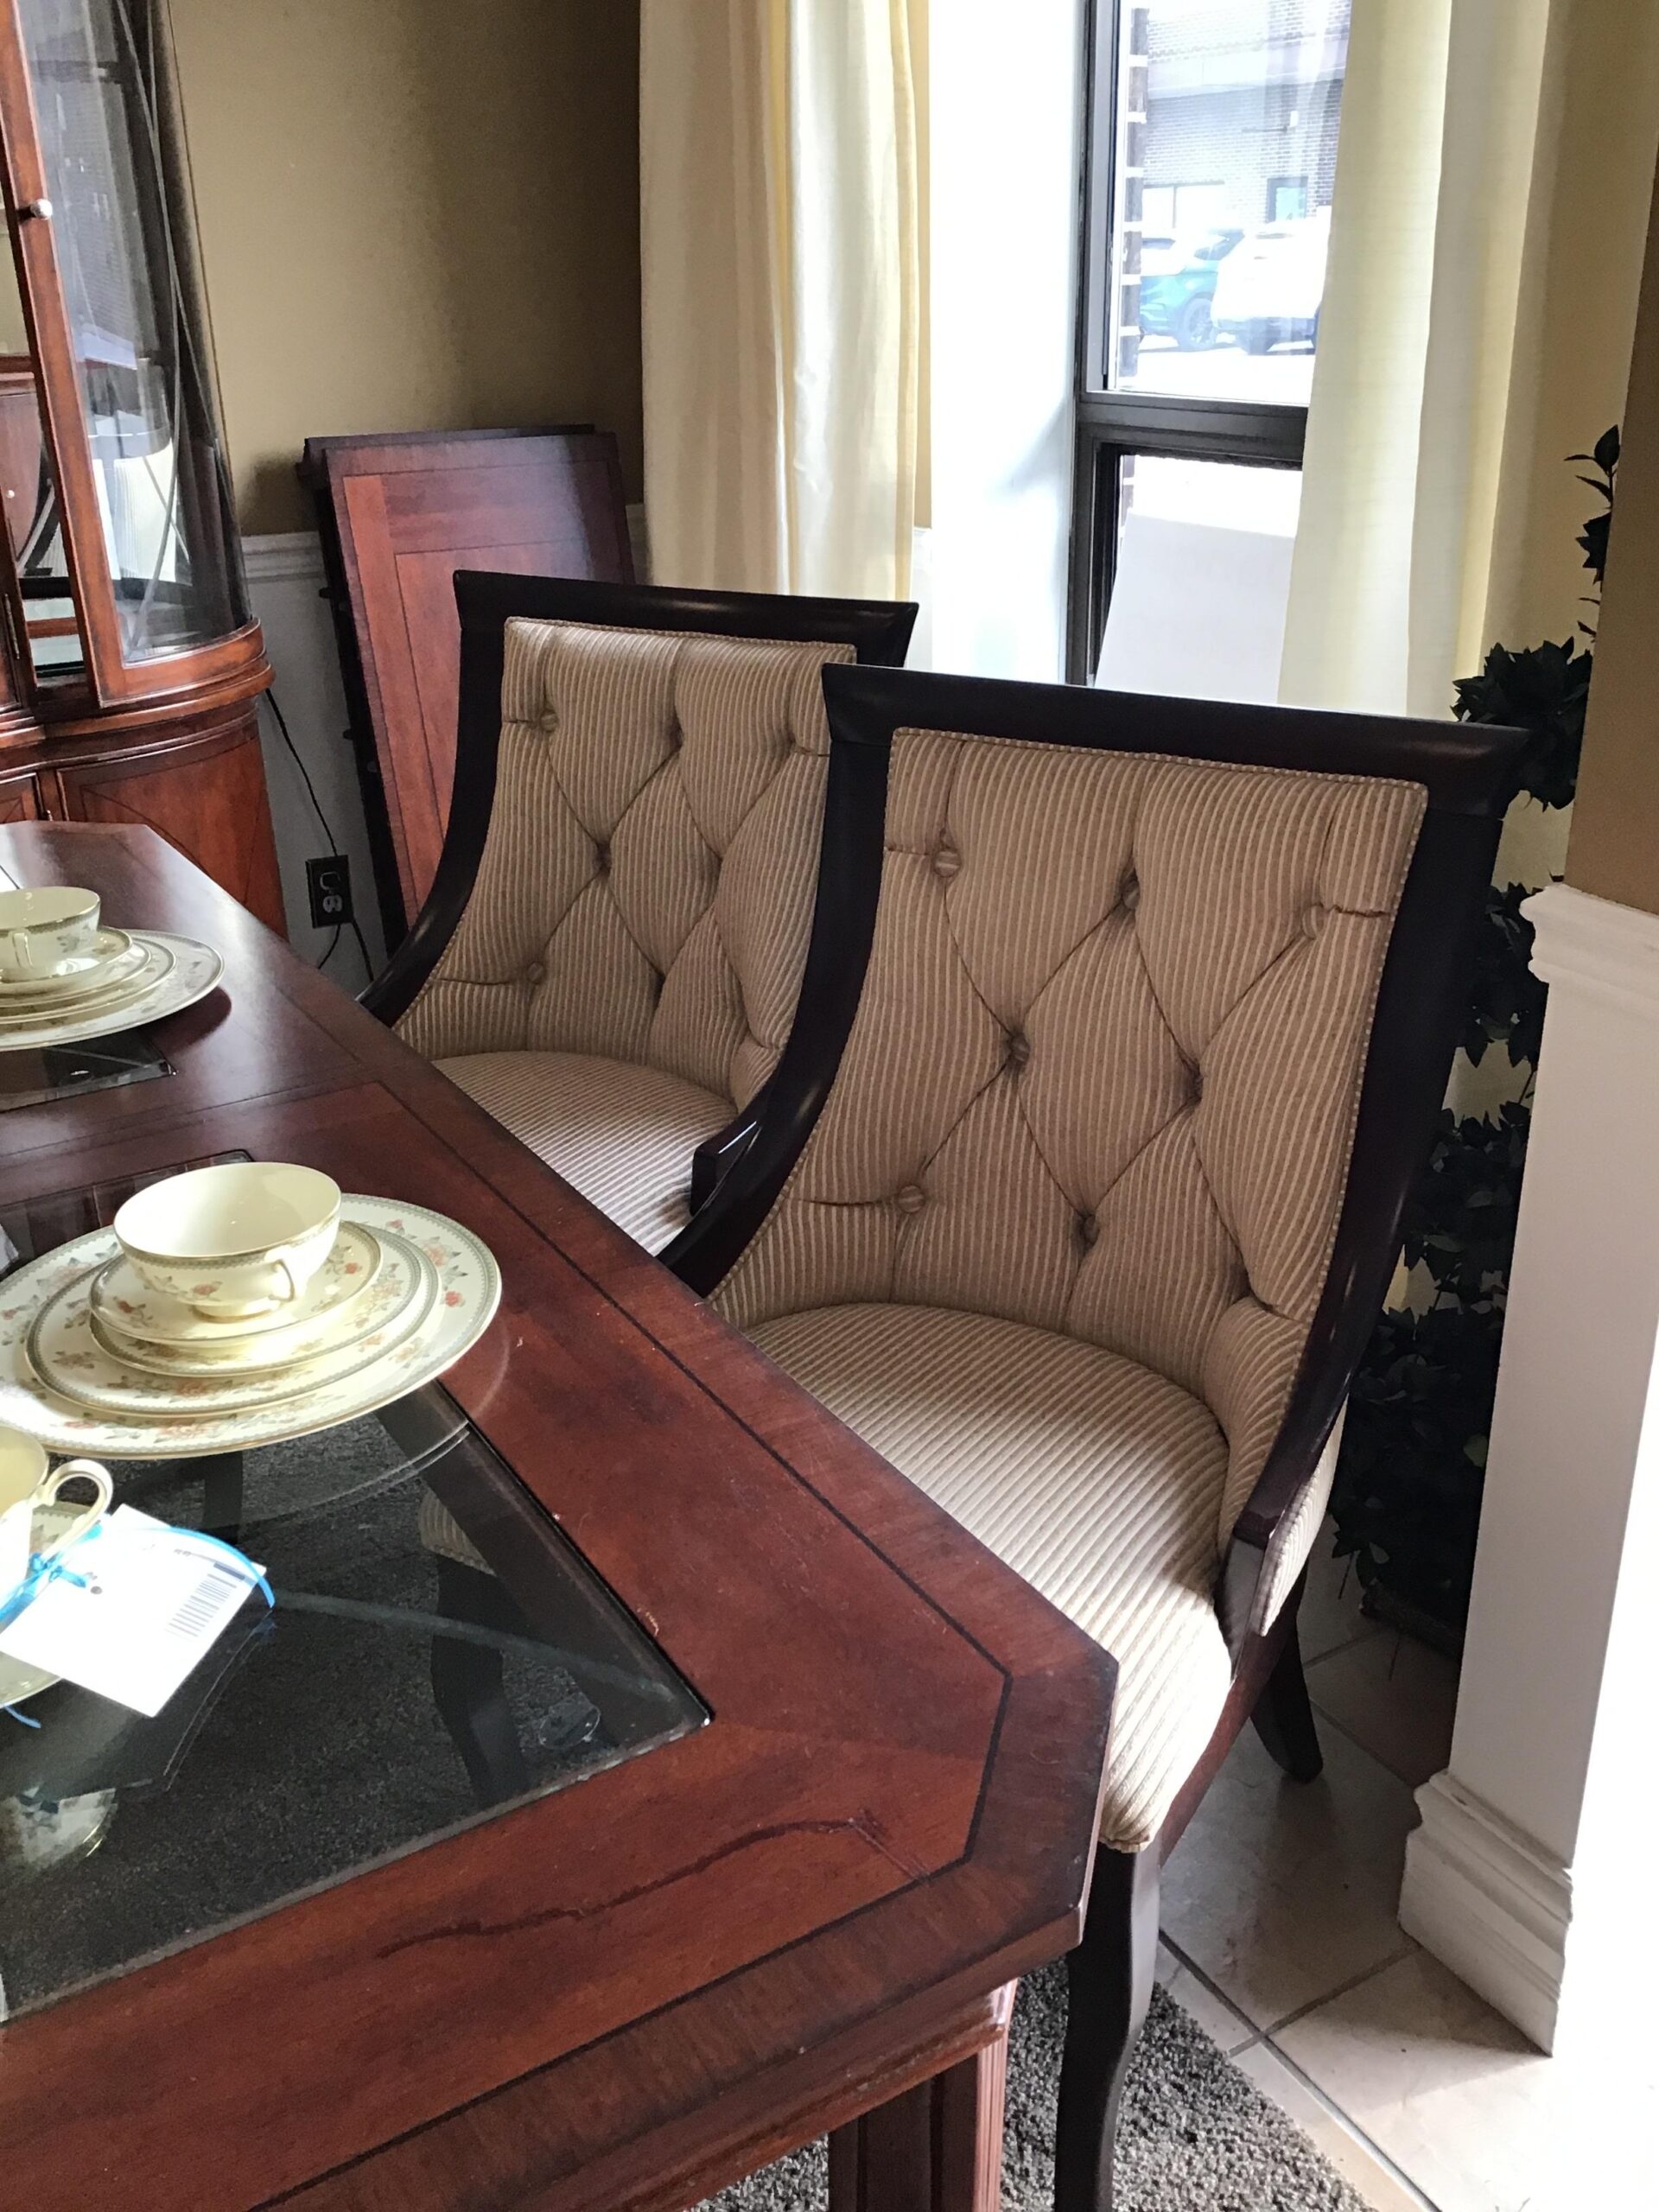 PAIR Meubles Casual Side Dining Chairs